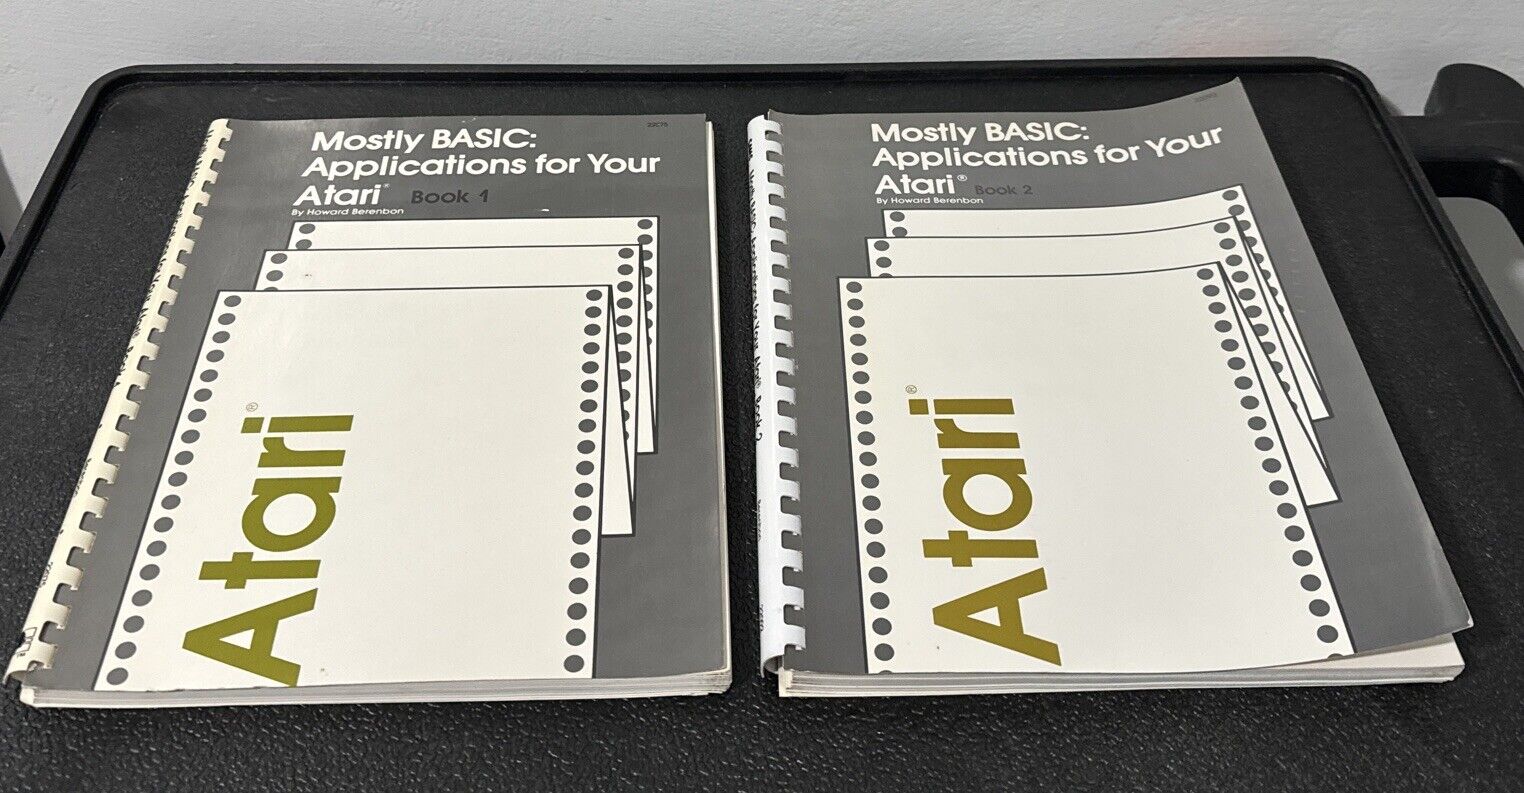 Mostly BASIC: Applications For Your Atari Book 1 & 2 for 400 800 1200 1400 XL XE